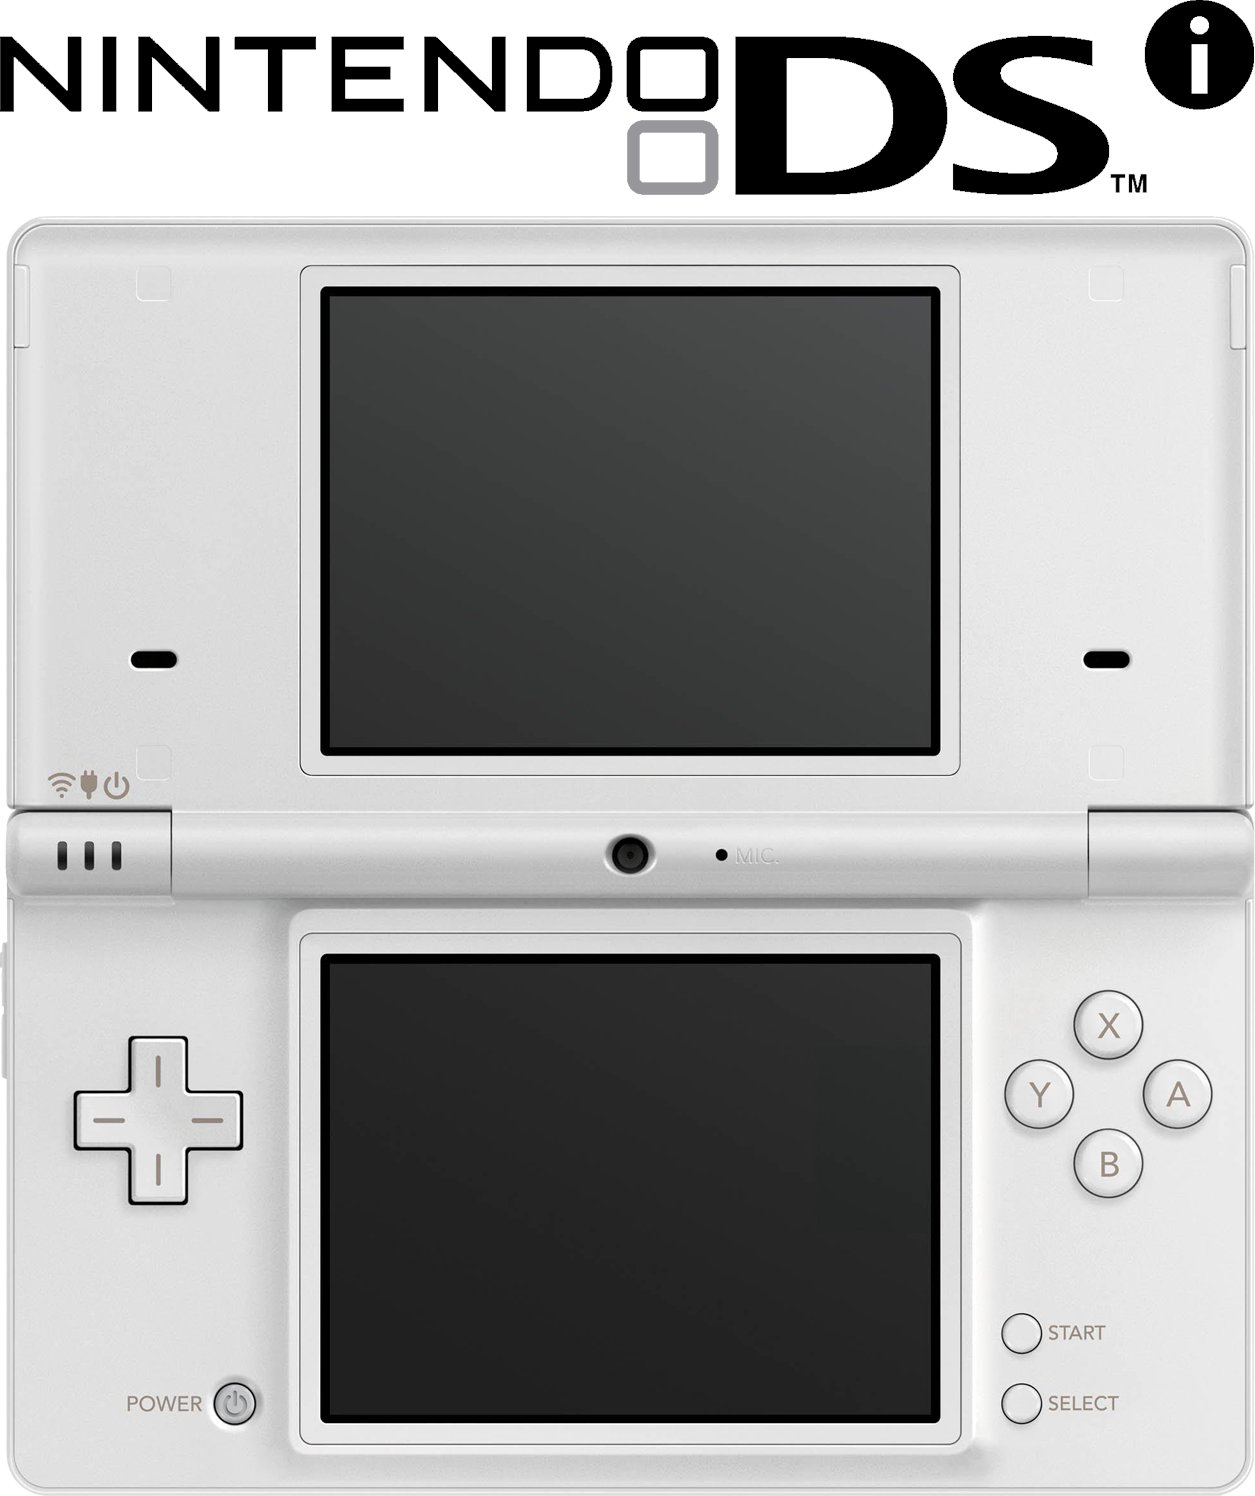 For en dagstur faldt I første omgang Bulbapedia on Twitter: "Today is the 12th anniversary of the Nintendo DSi,  first released in Japan on November 1, 2008! It is the second redesign of  the Nintendo DS, after the DS